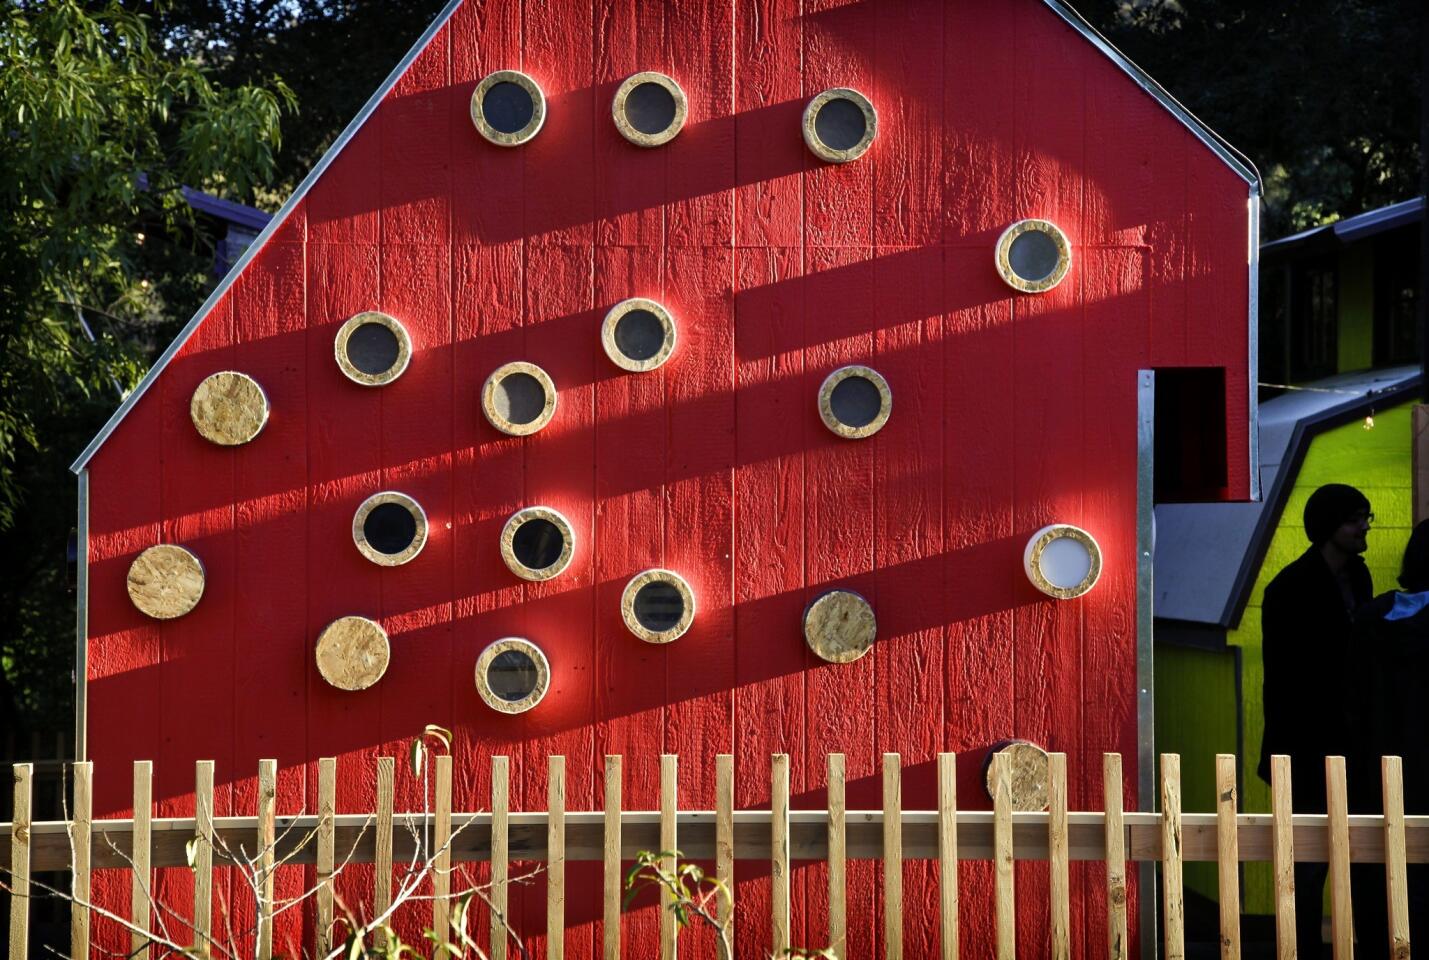 The miniature cabins were built at the Shadow Hills Riding Club, which will use them as part of an equestrian therapy program. The Woodbury students assigned to build a music-themed cabin painted their design red in homage to traditional barns, team member Angela Isayan said. For more on the function of the portholes, keep clicking …